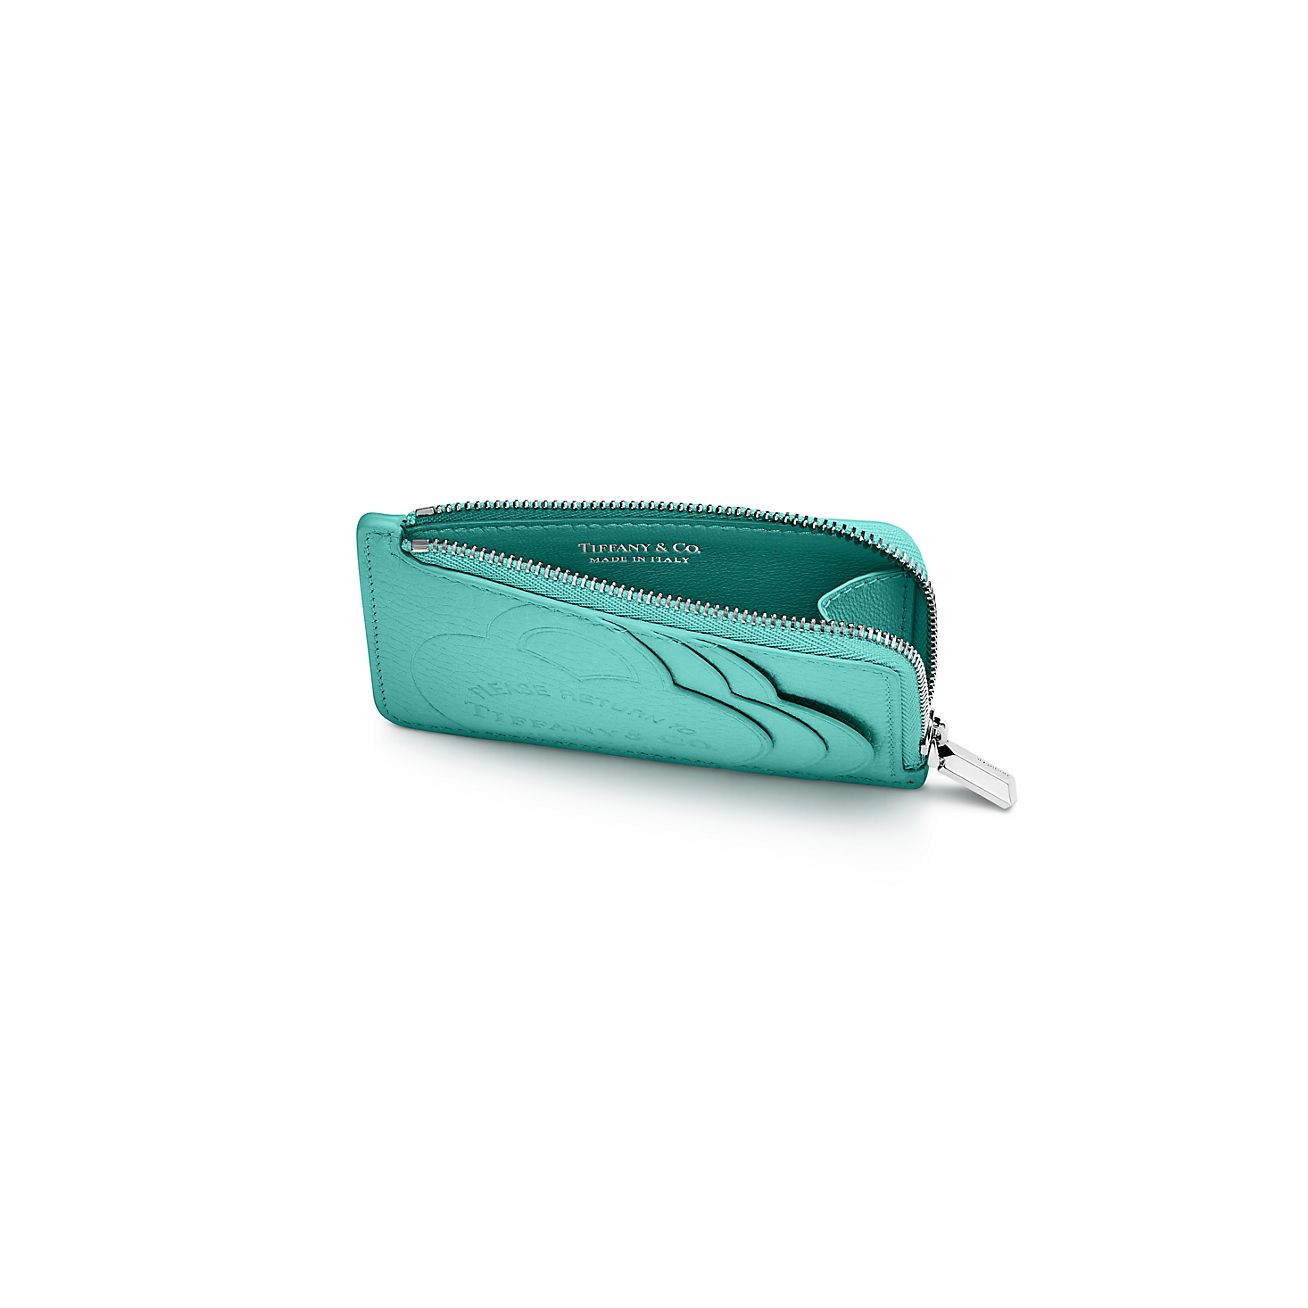 Return to Tiffany Small Zip Wallet in Tiffany Blue Leather